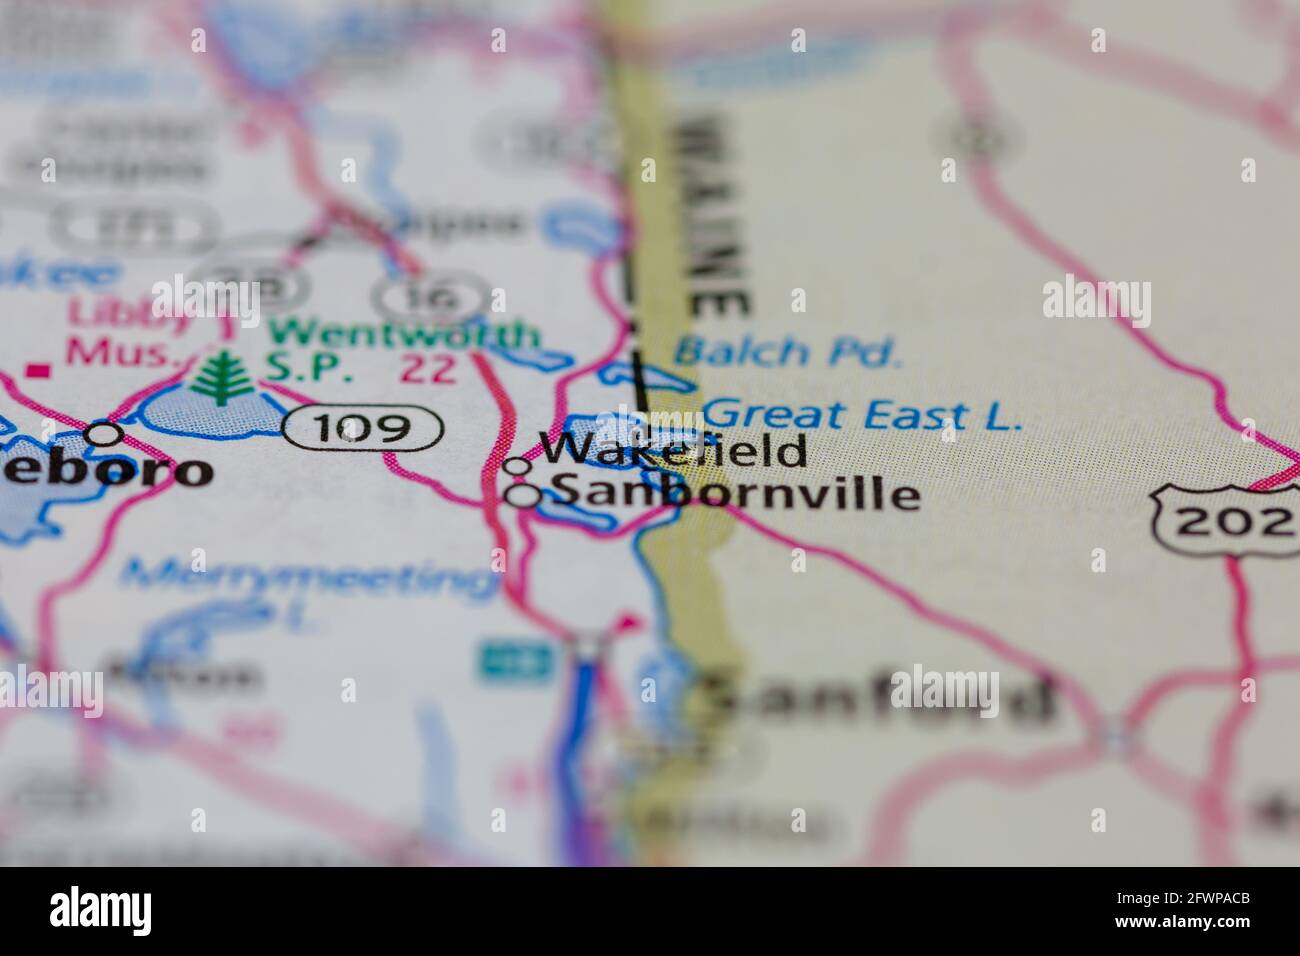 Wakefield New Hampshire USA shown on a Geography map or Road map Stock Photo